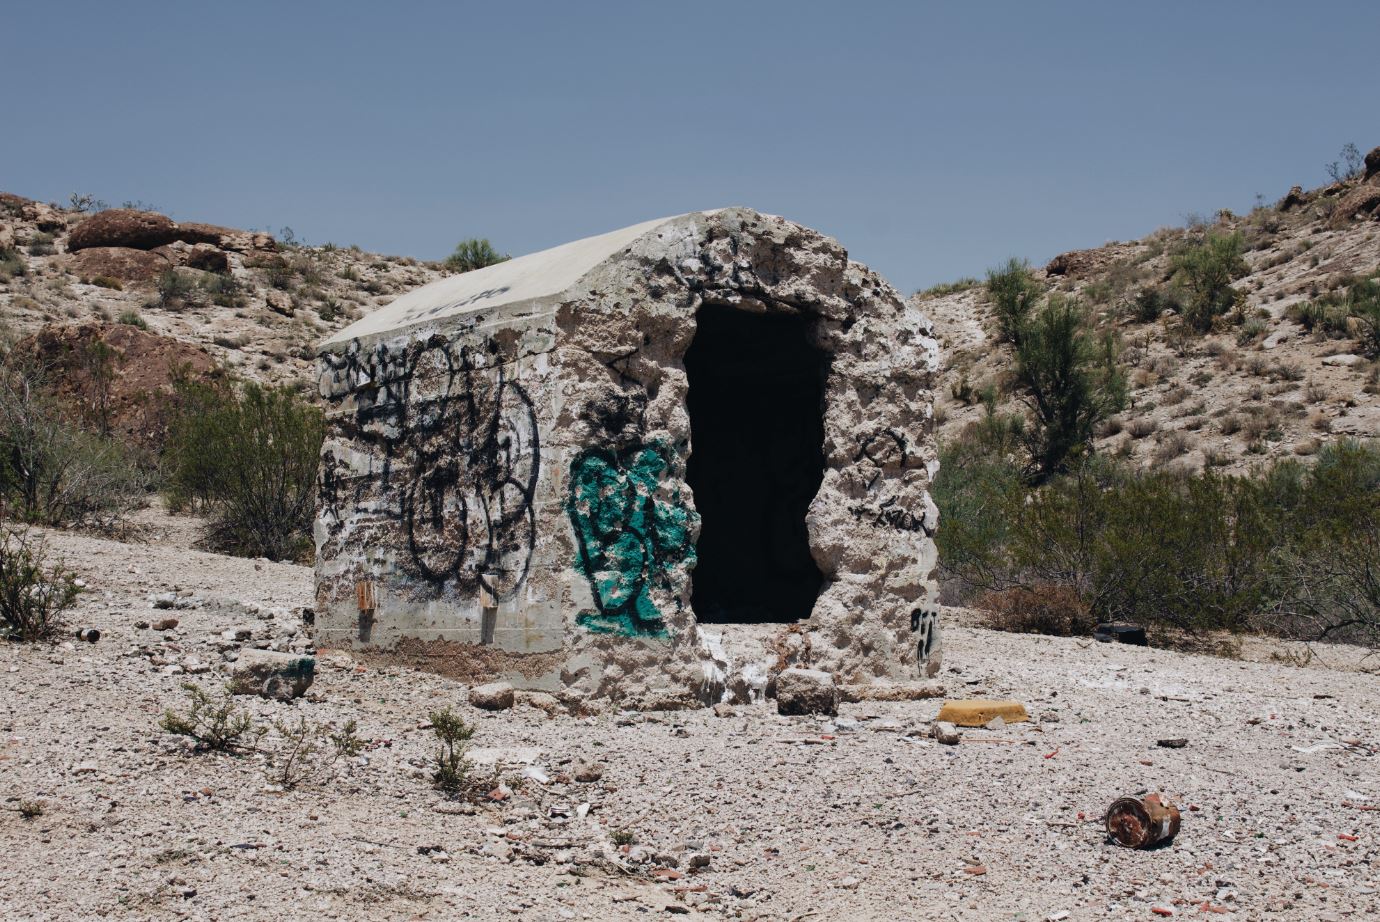 ARIZONA: SLAUGHTERHOUSE CANYON.One day, a father failed to return to his cabin during the 1800s gold rush, and his family starved. The mother went insane, put on her wedding dress, and chopped her children up. Supposedly, you can still hear her cries for forgiveness.